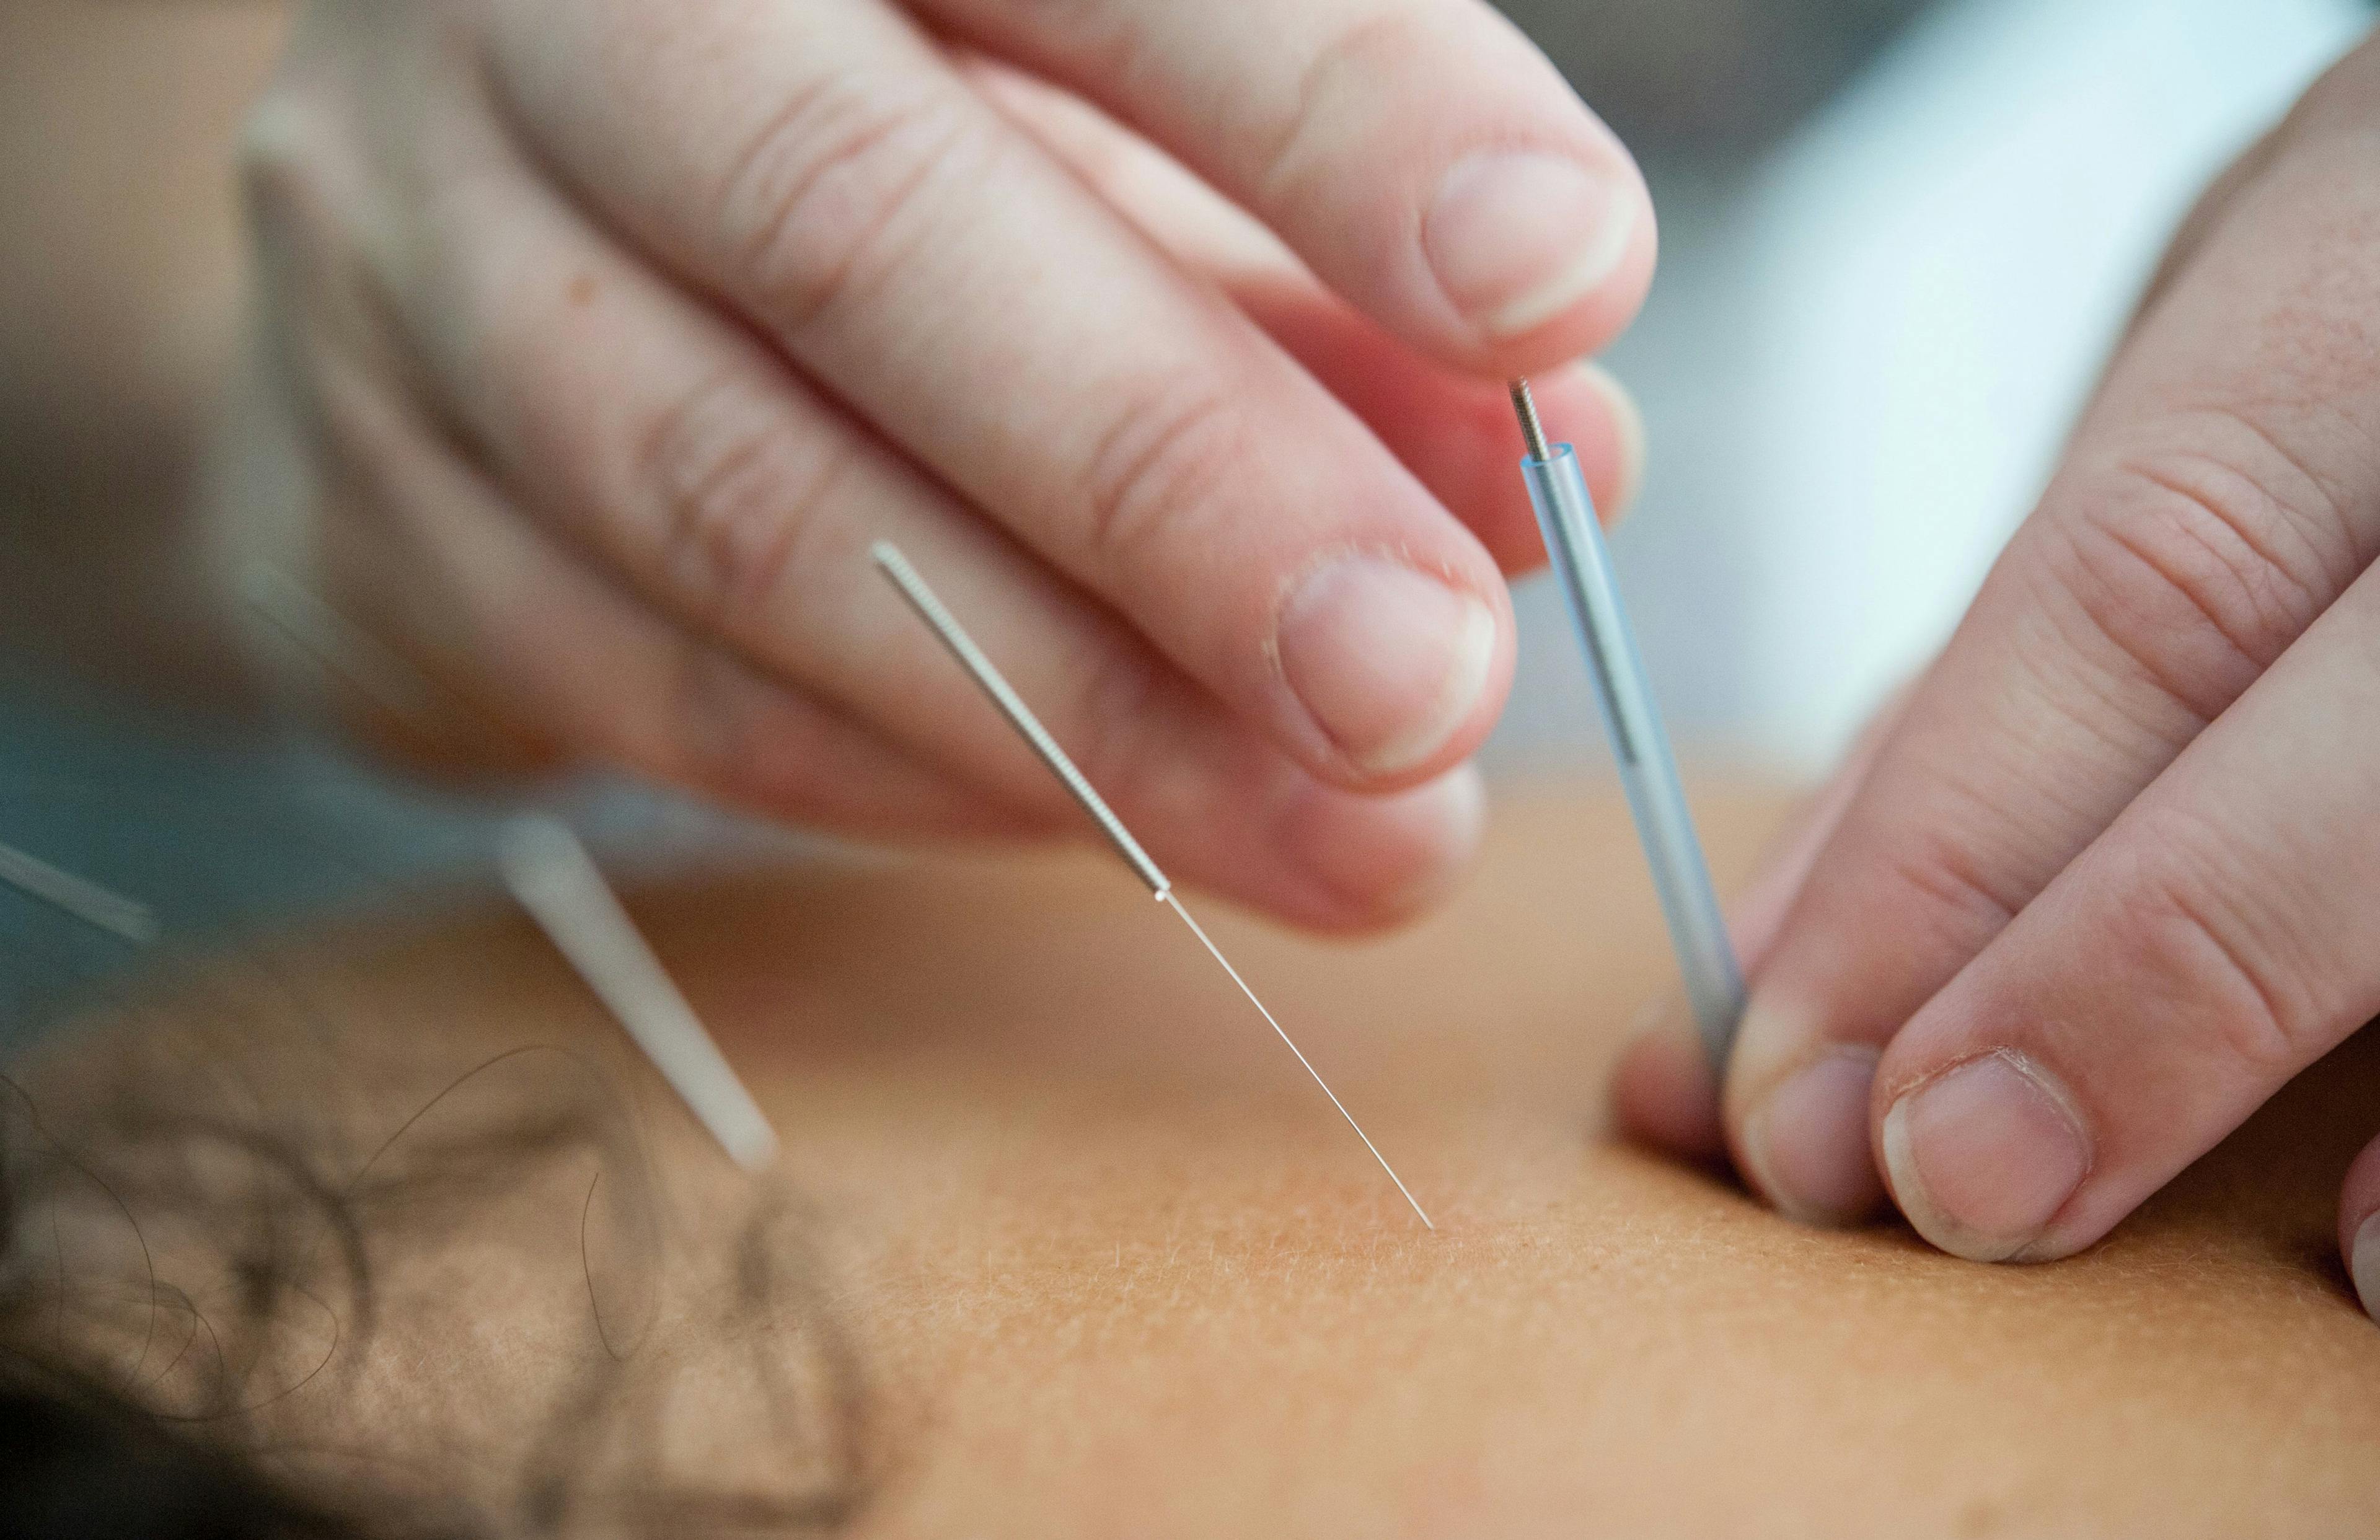 Acupuncture May Reduce Pain Levels in Patients with Breast Cancer